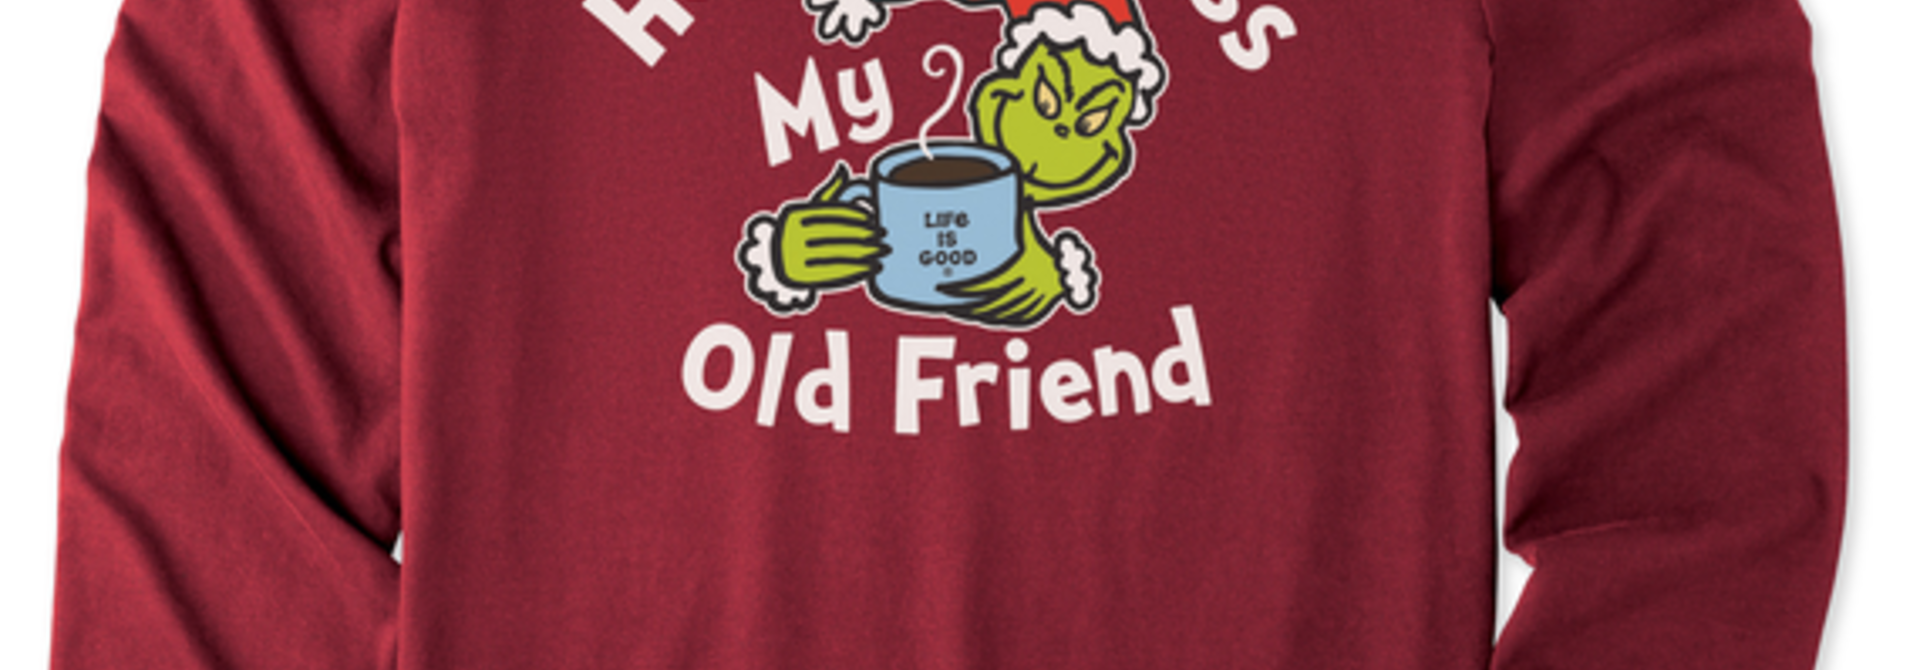 M's The Grinch Hello Darkness Long Sleeve Crusher Tee, Cranberry Red